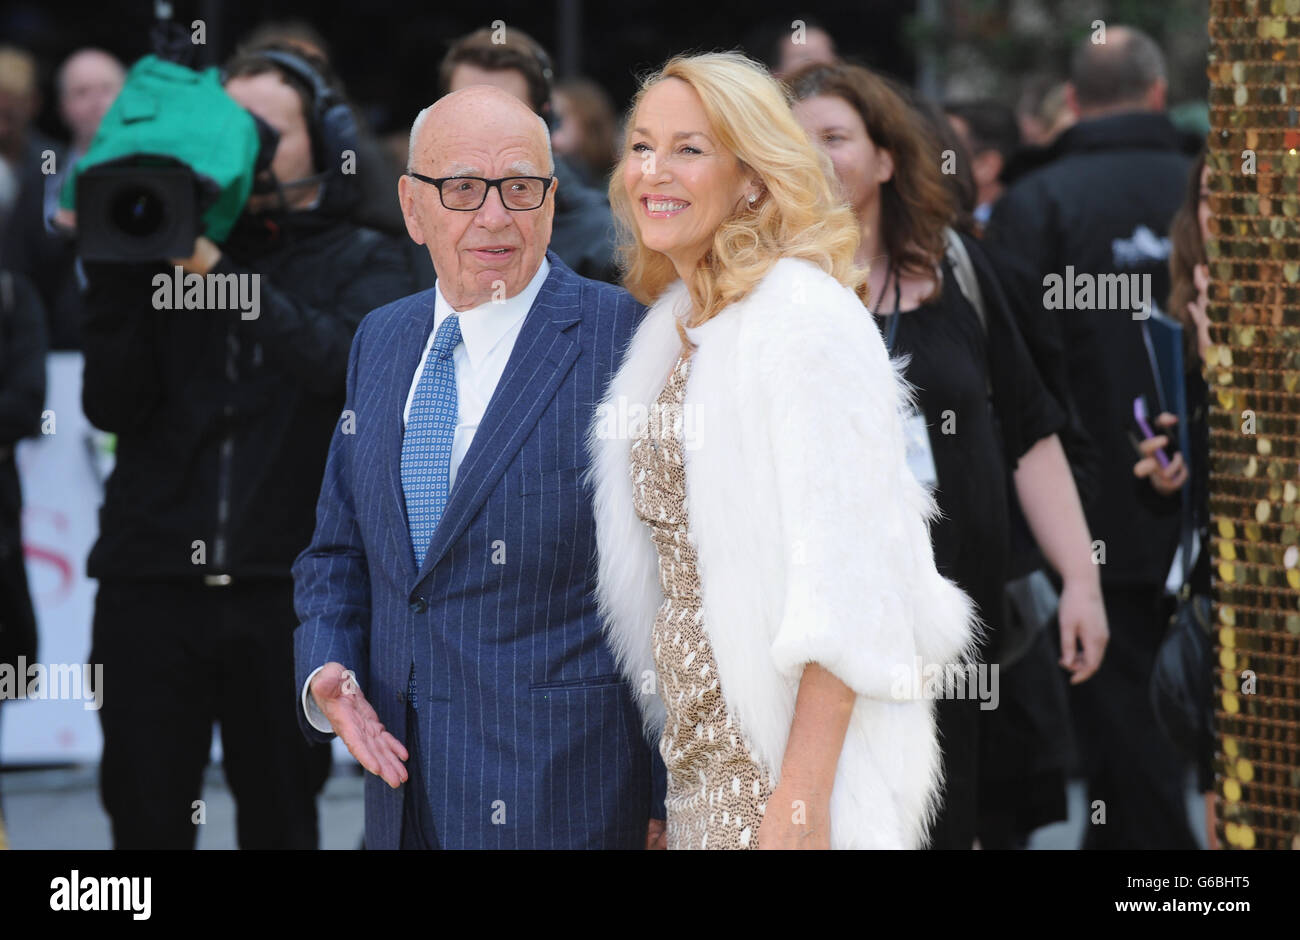 London, UK. 29th June, 2016. Rupert Murdoch and Jerry Hall attend the World Premiere of 'Absolutely Fabulous' at Odeon Leciester Square. Credit:  Ferdaus Shamim/ZUMA Wire/Alamy Live News Stock Photo